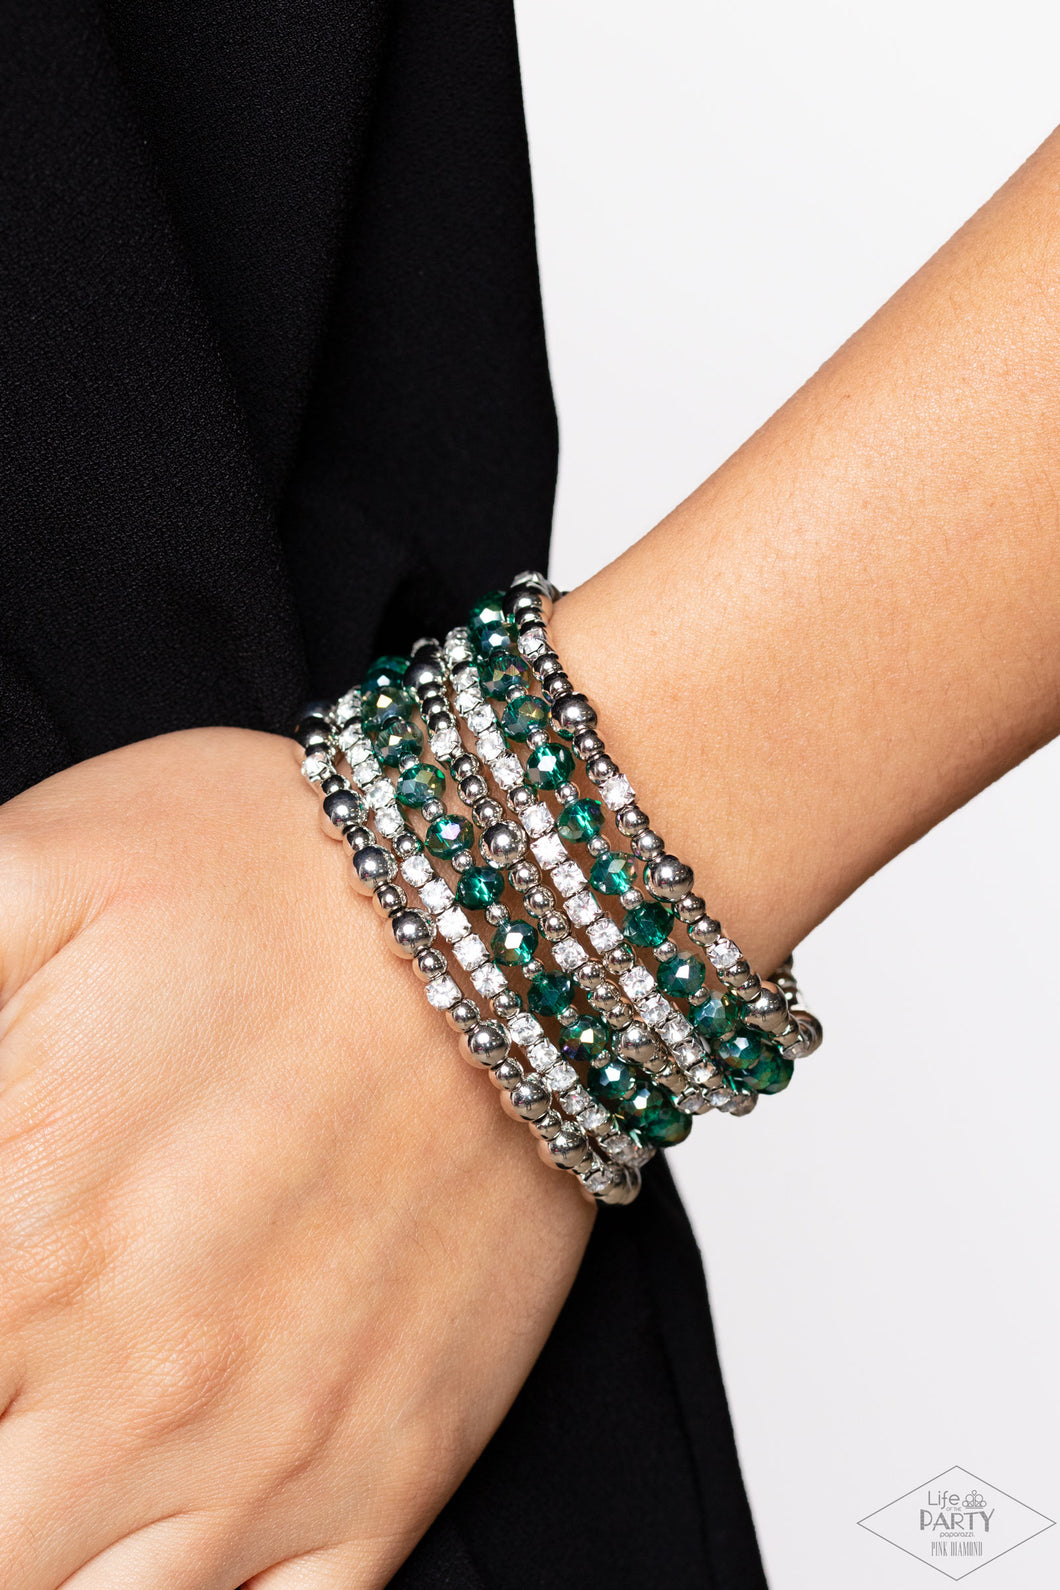 An icy collection of silver beads, cubes, opaque green crystals with an iridescent shimmer, and glassy white rhinestones are threaded along a coiled wire, creating a blinding infinity wrap style bracelet around the wrist. Due to its prismatic palette, color may vary.  Sold as one individual bracelet.